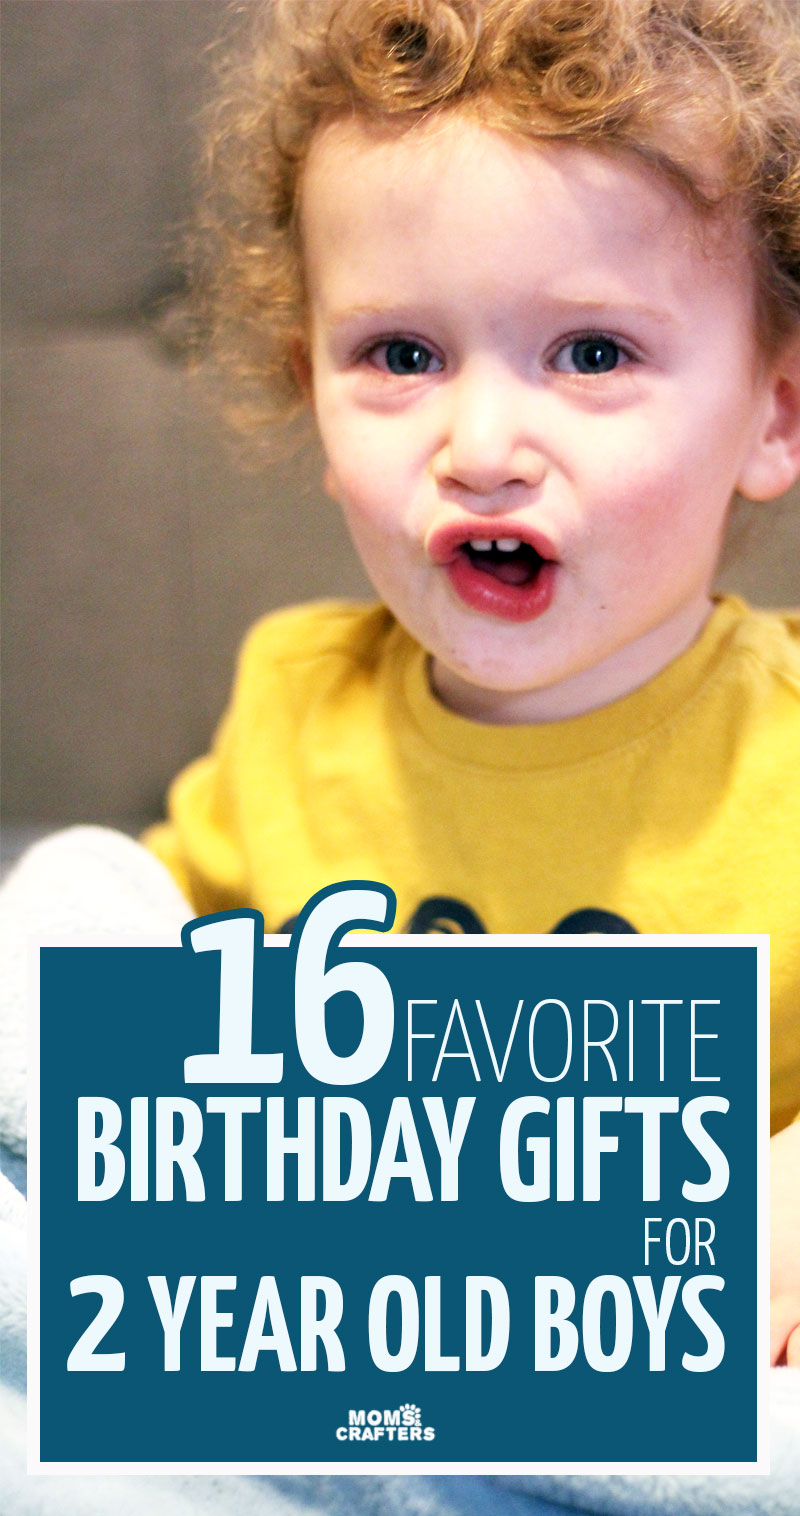 Click to see the best birthday gifts for two year old boys! These educational toys and non-toy gifts for toddlers are perfect for Christmas gifts too! #gifts #toddlers #birthday #twoyearsold #two #toddler #parenting #christmas #holidays #birthdayparty